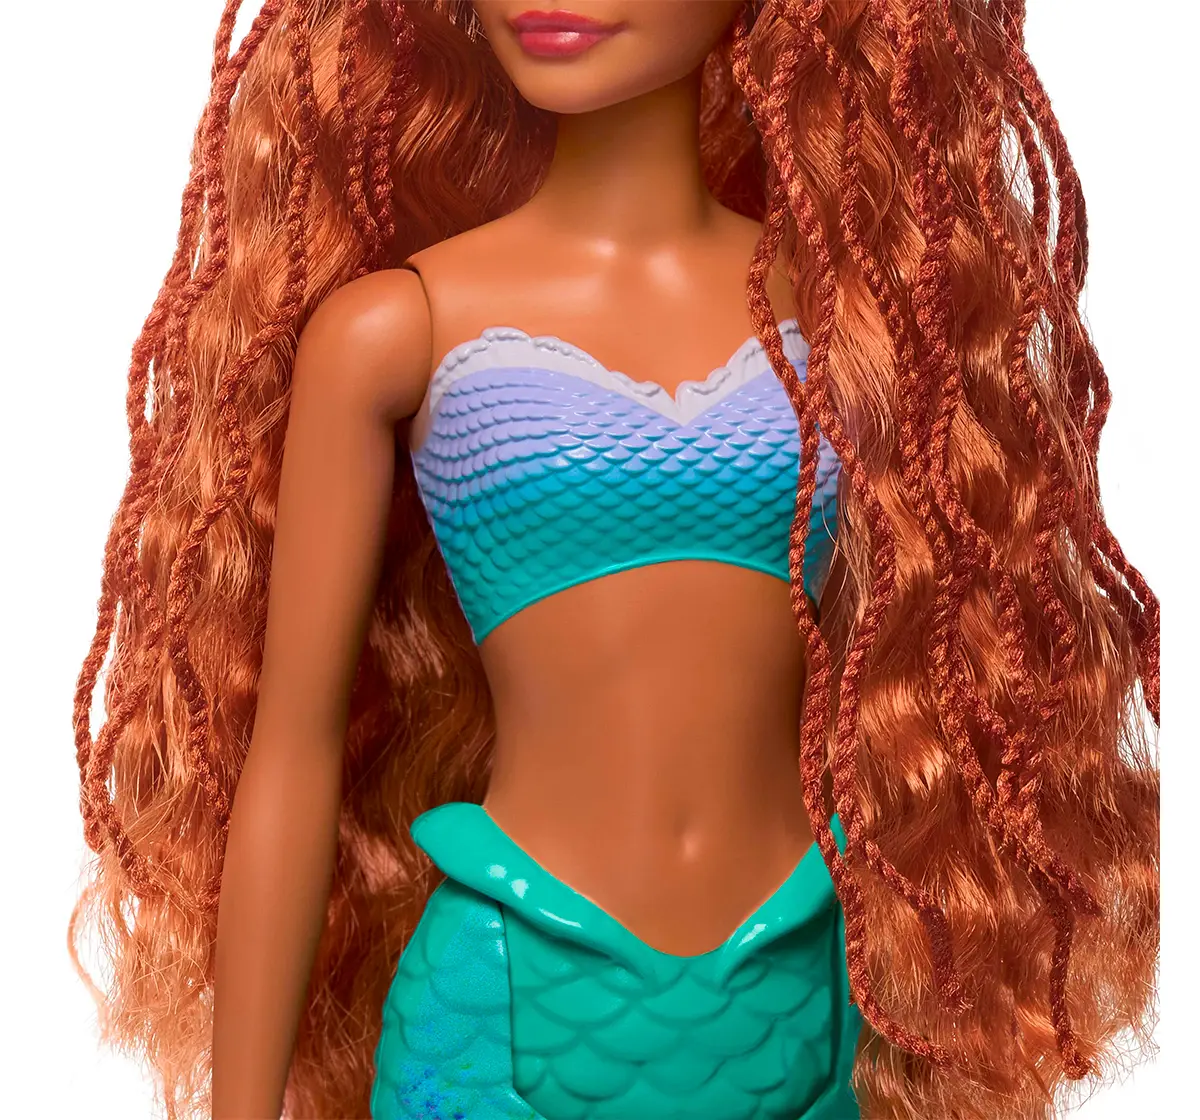 A barbie Included Mermaid Doll With Tail/fin and 3D Printed